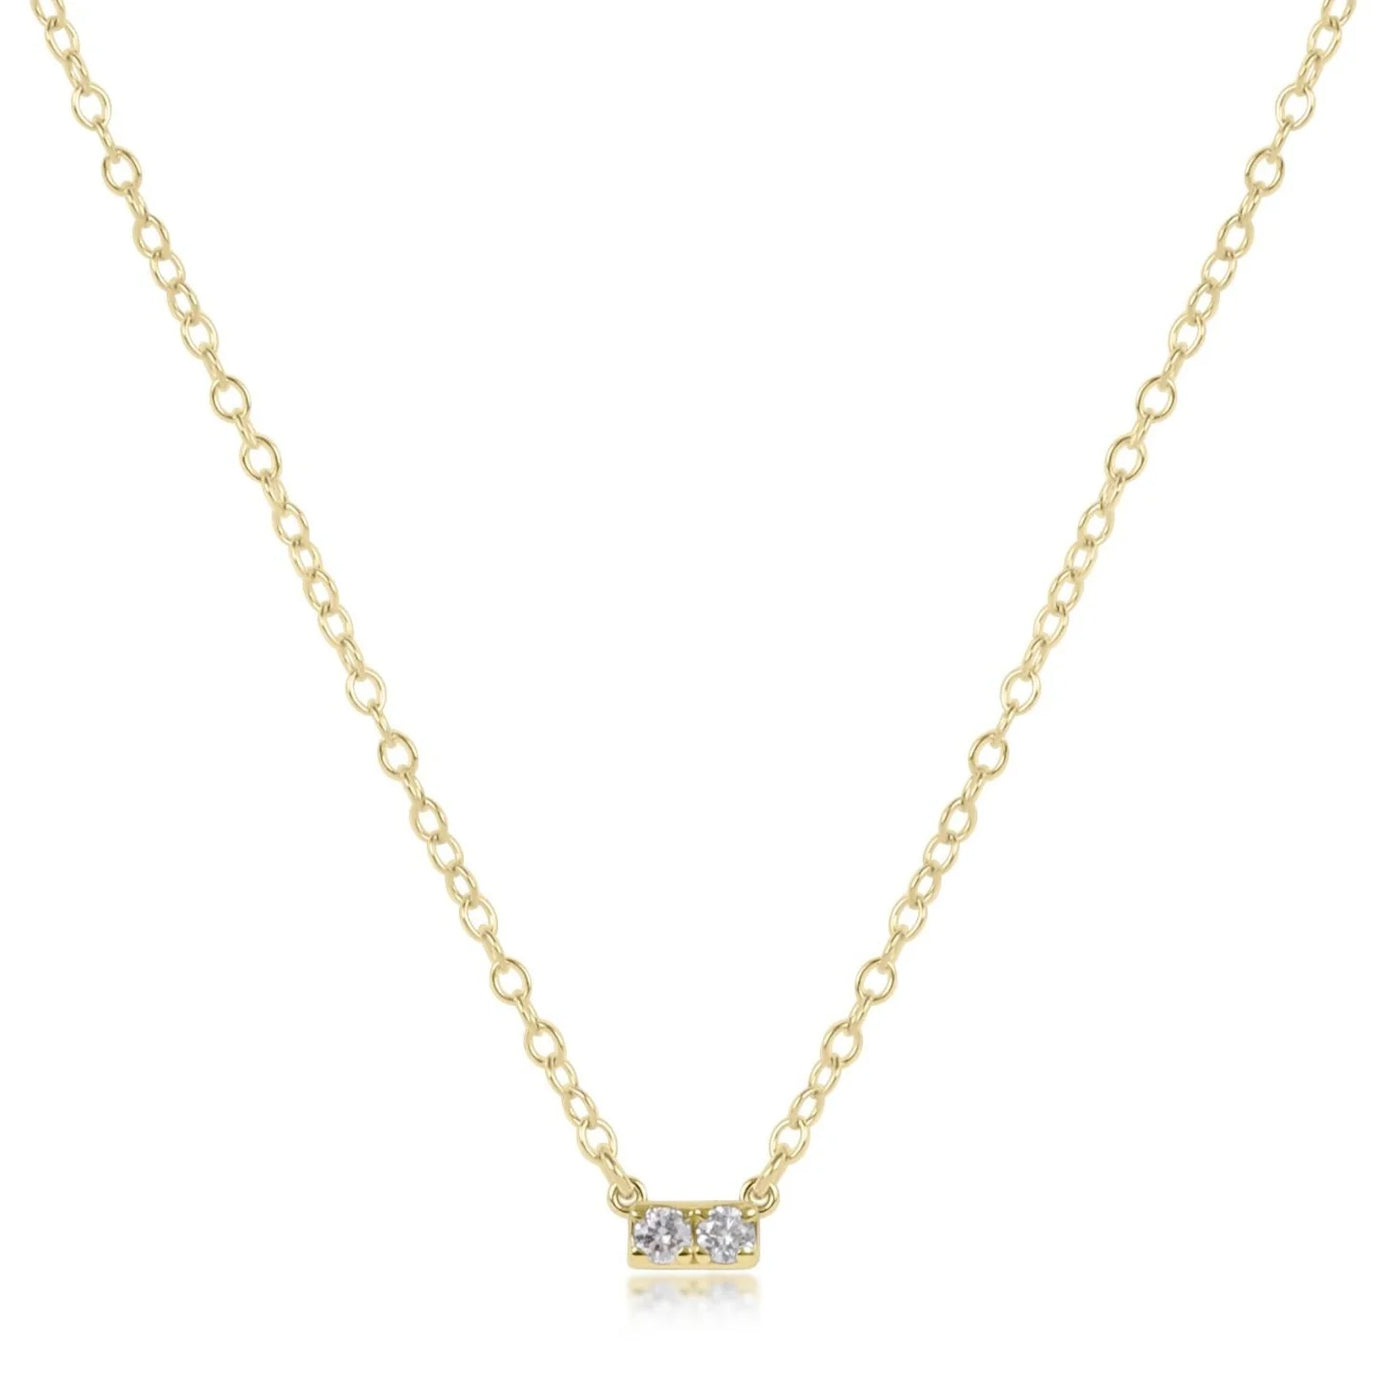 Enewton 14kt gold and diamond significance bar necklace - two